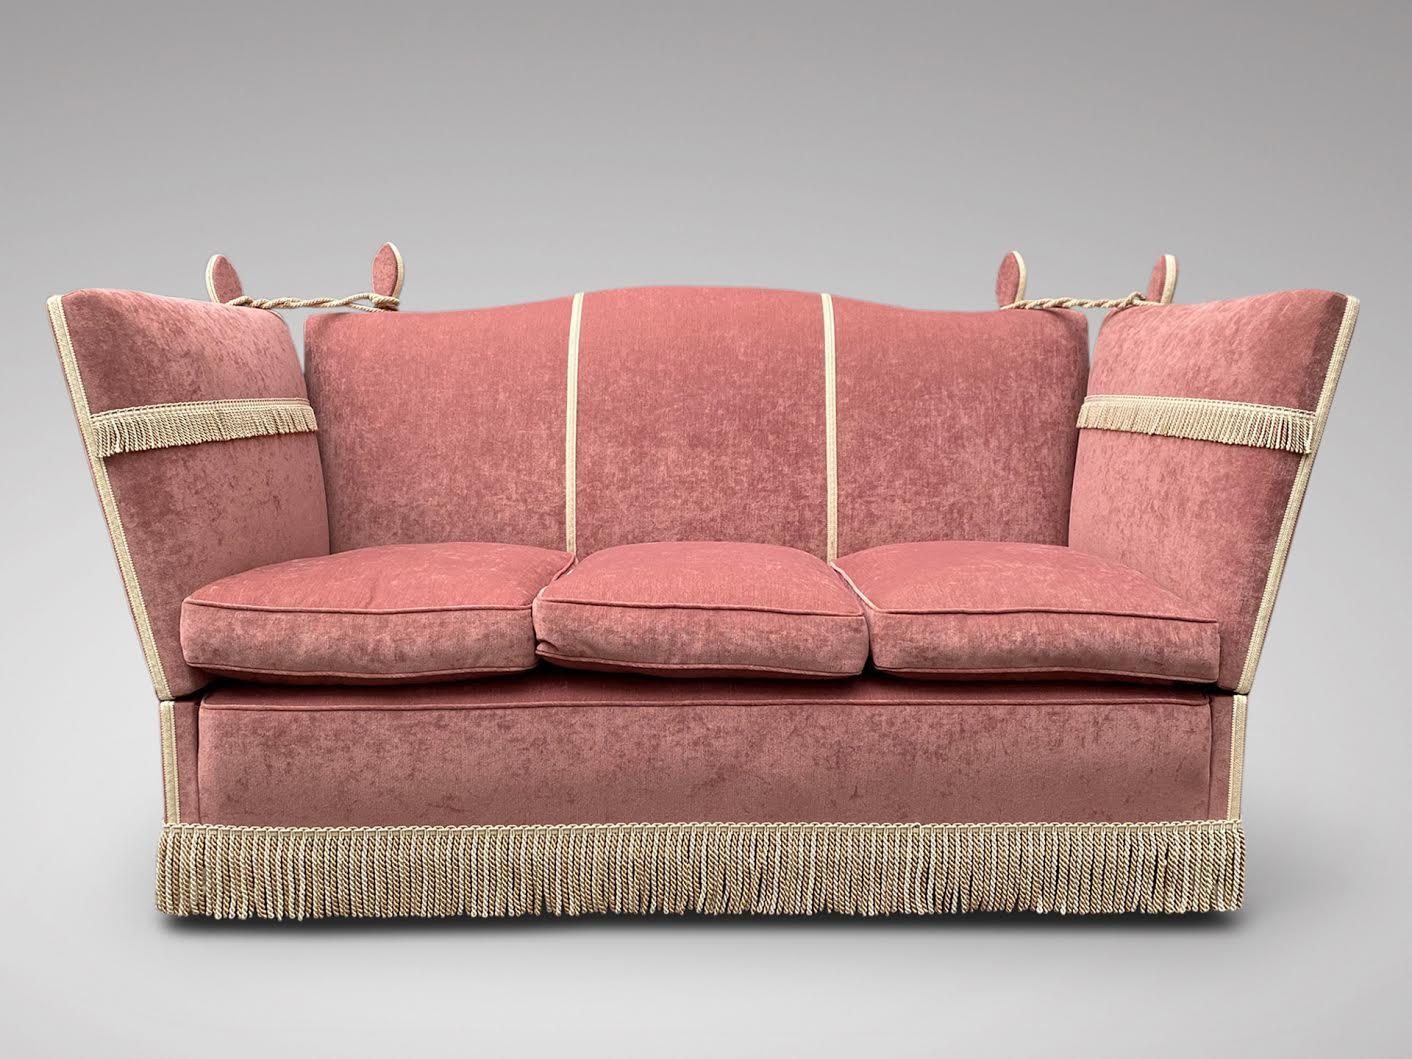 We are delighted to offer for sale this superb quality and very clean three seater Knole sofa. With the high hump shaped backrest and drop sides typical of the form. Sprung seat with deep feather filled seat cushions. Light pink chenille upholstery